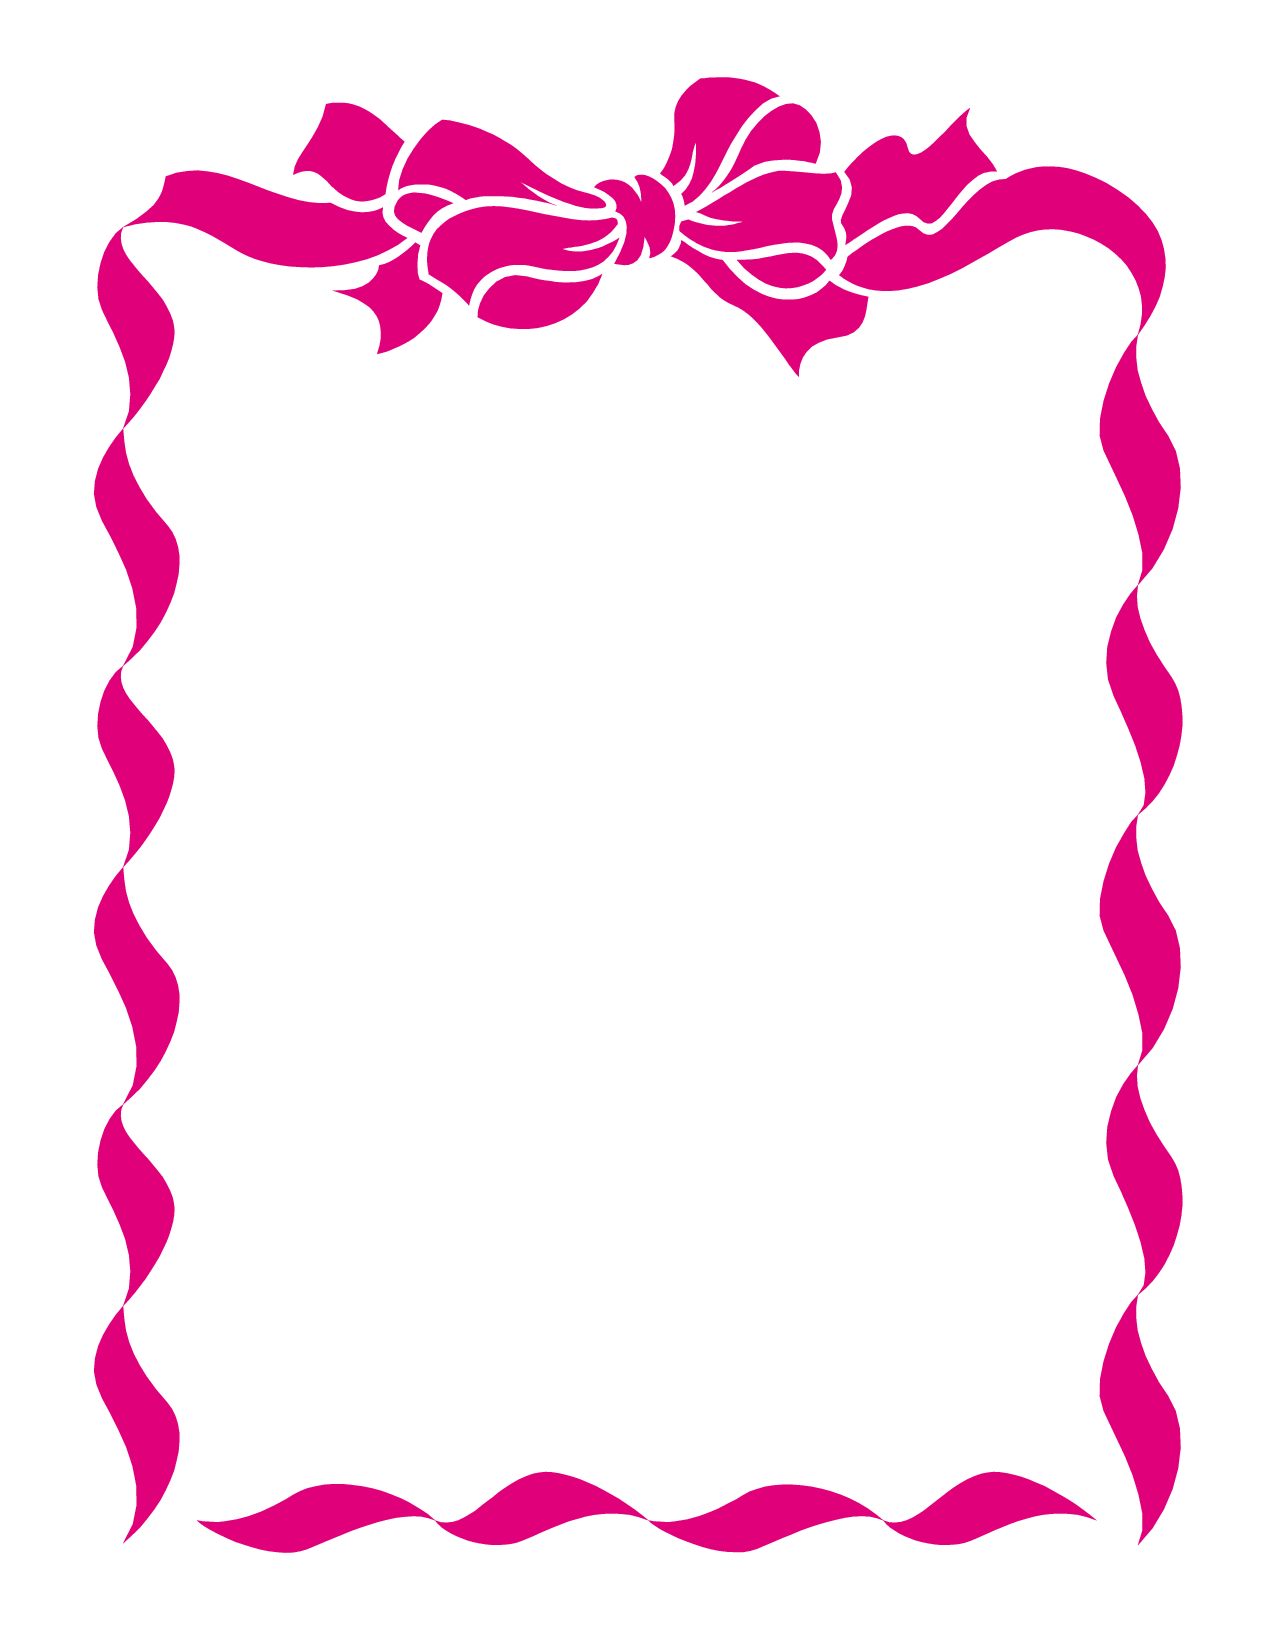 Red Bow Border Clipart #1. Re